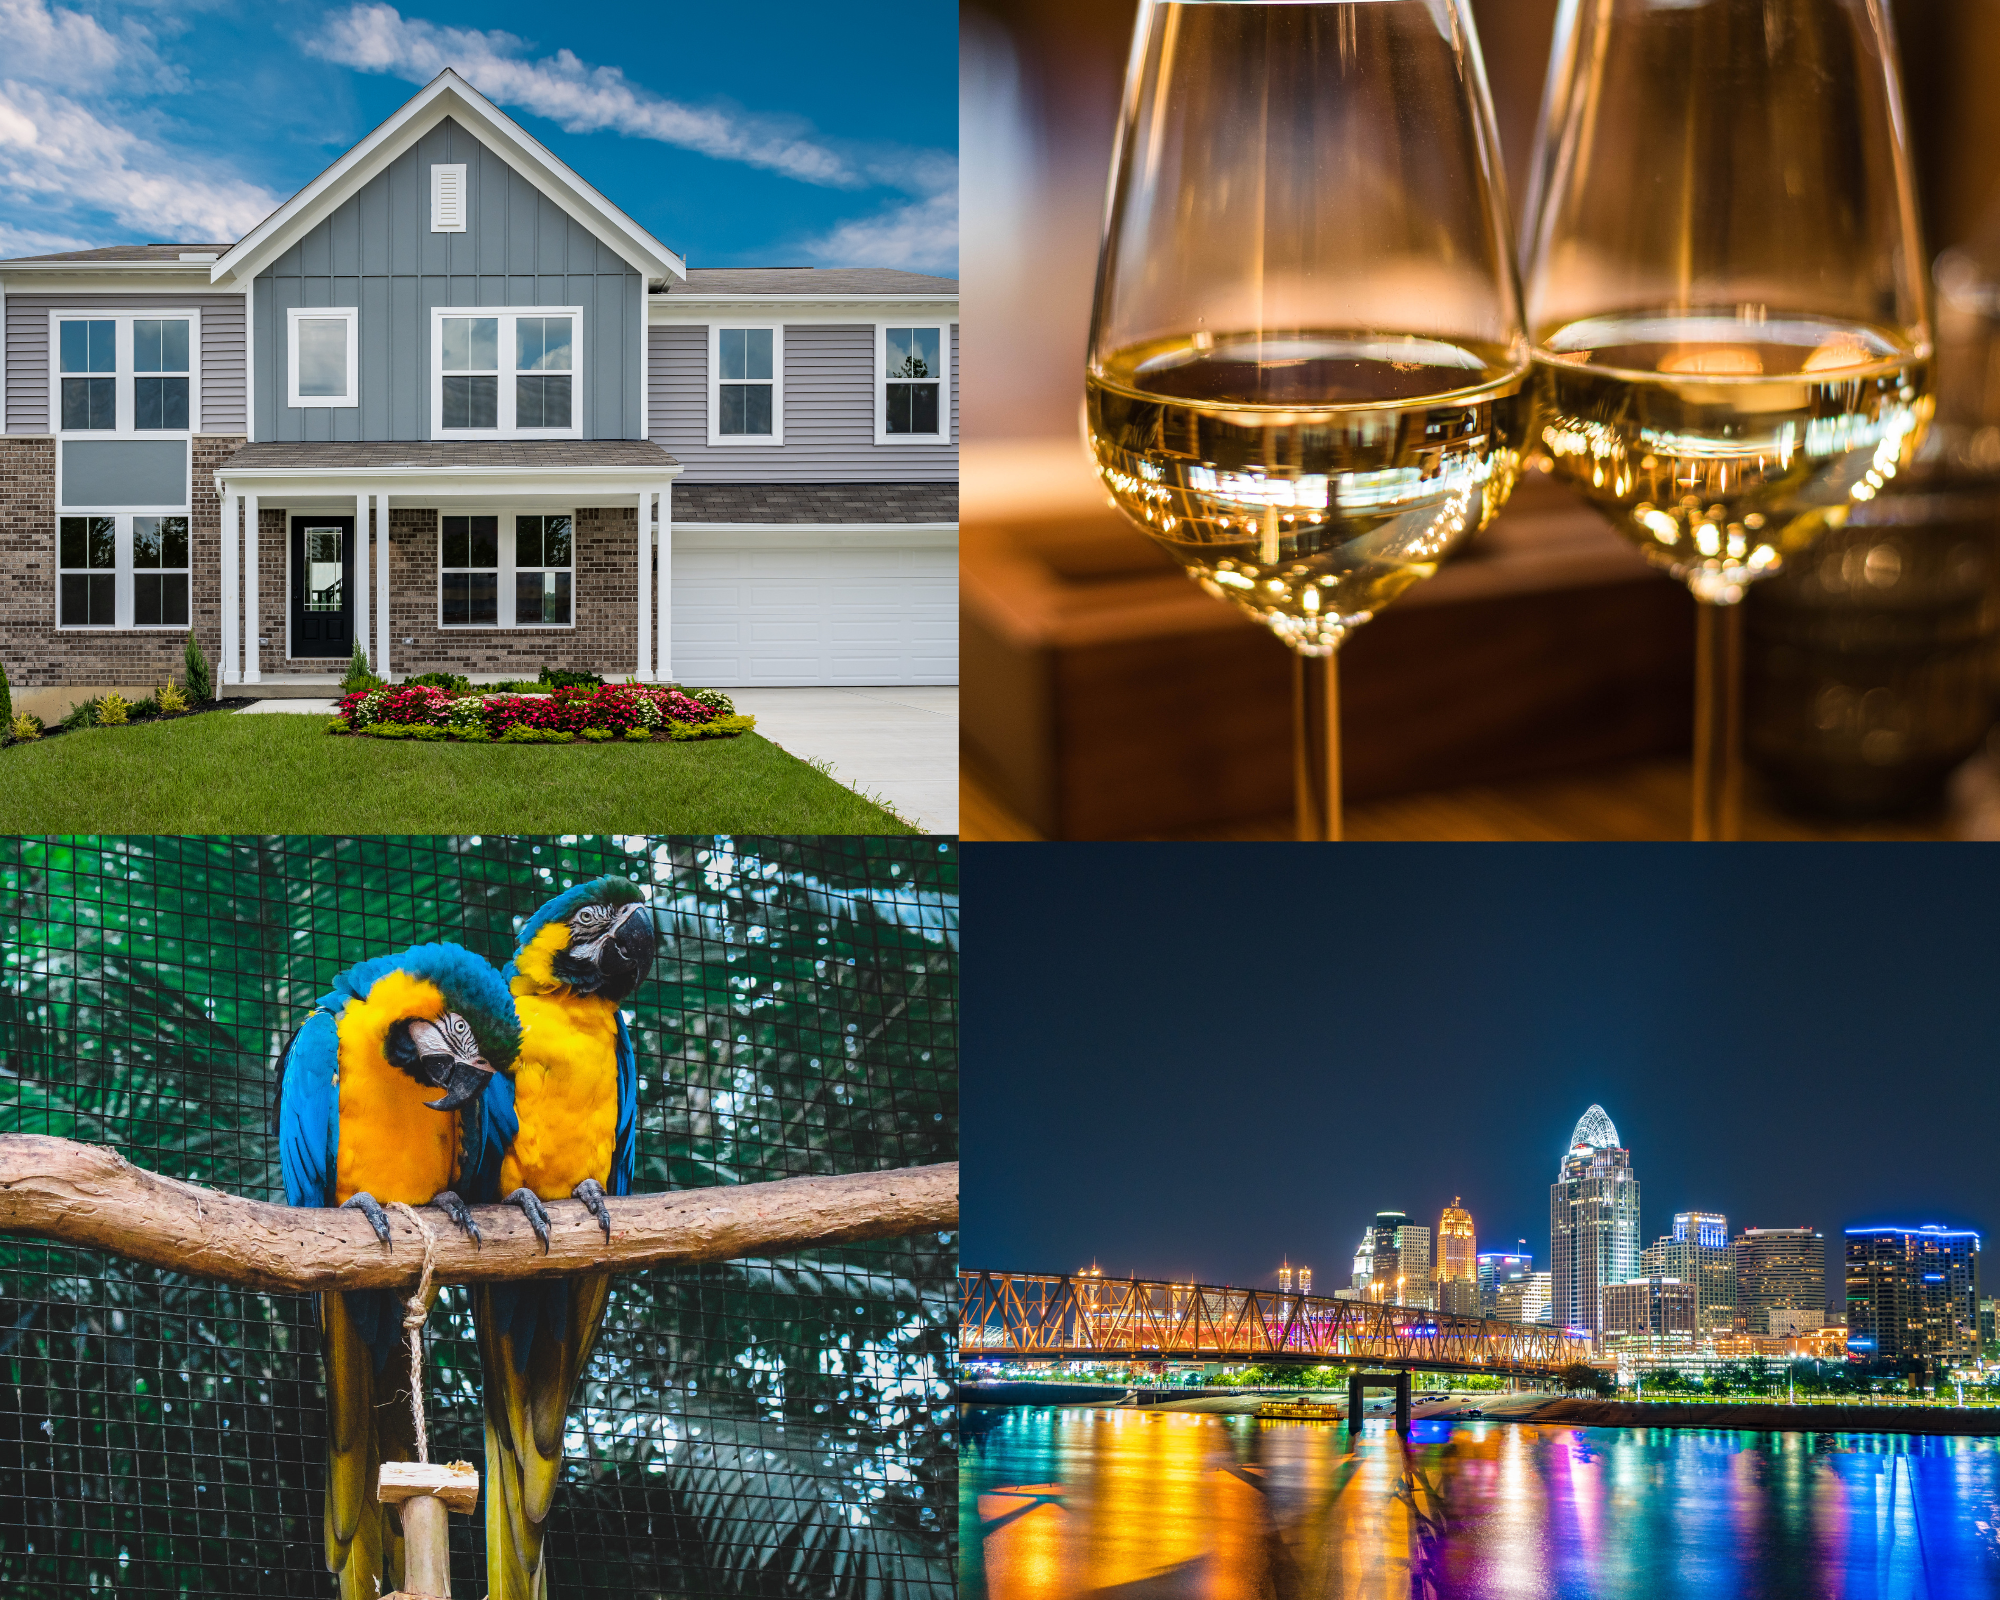 Get to know Independence! This Northern Kentucky community sits on the South side of Cincinnati, providing a variety of conveniences and amenities to its residents.